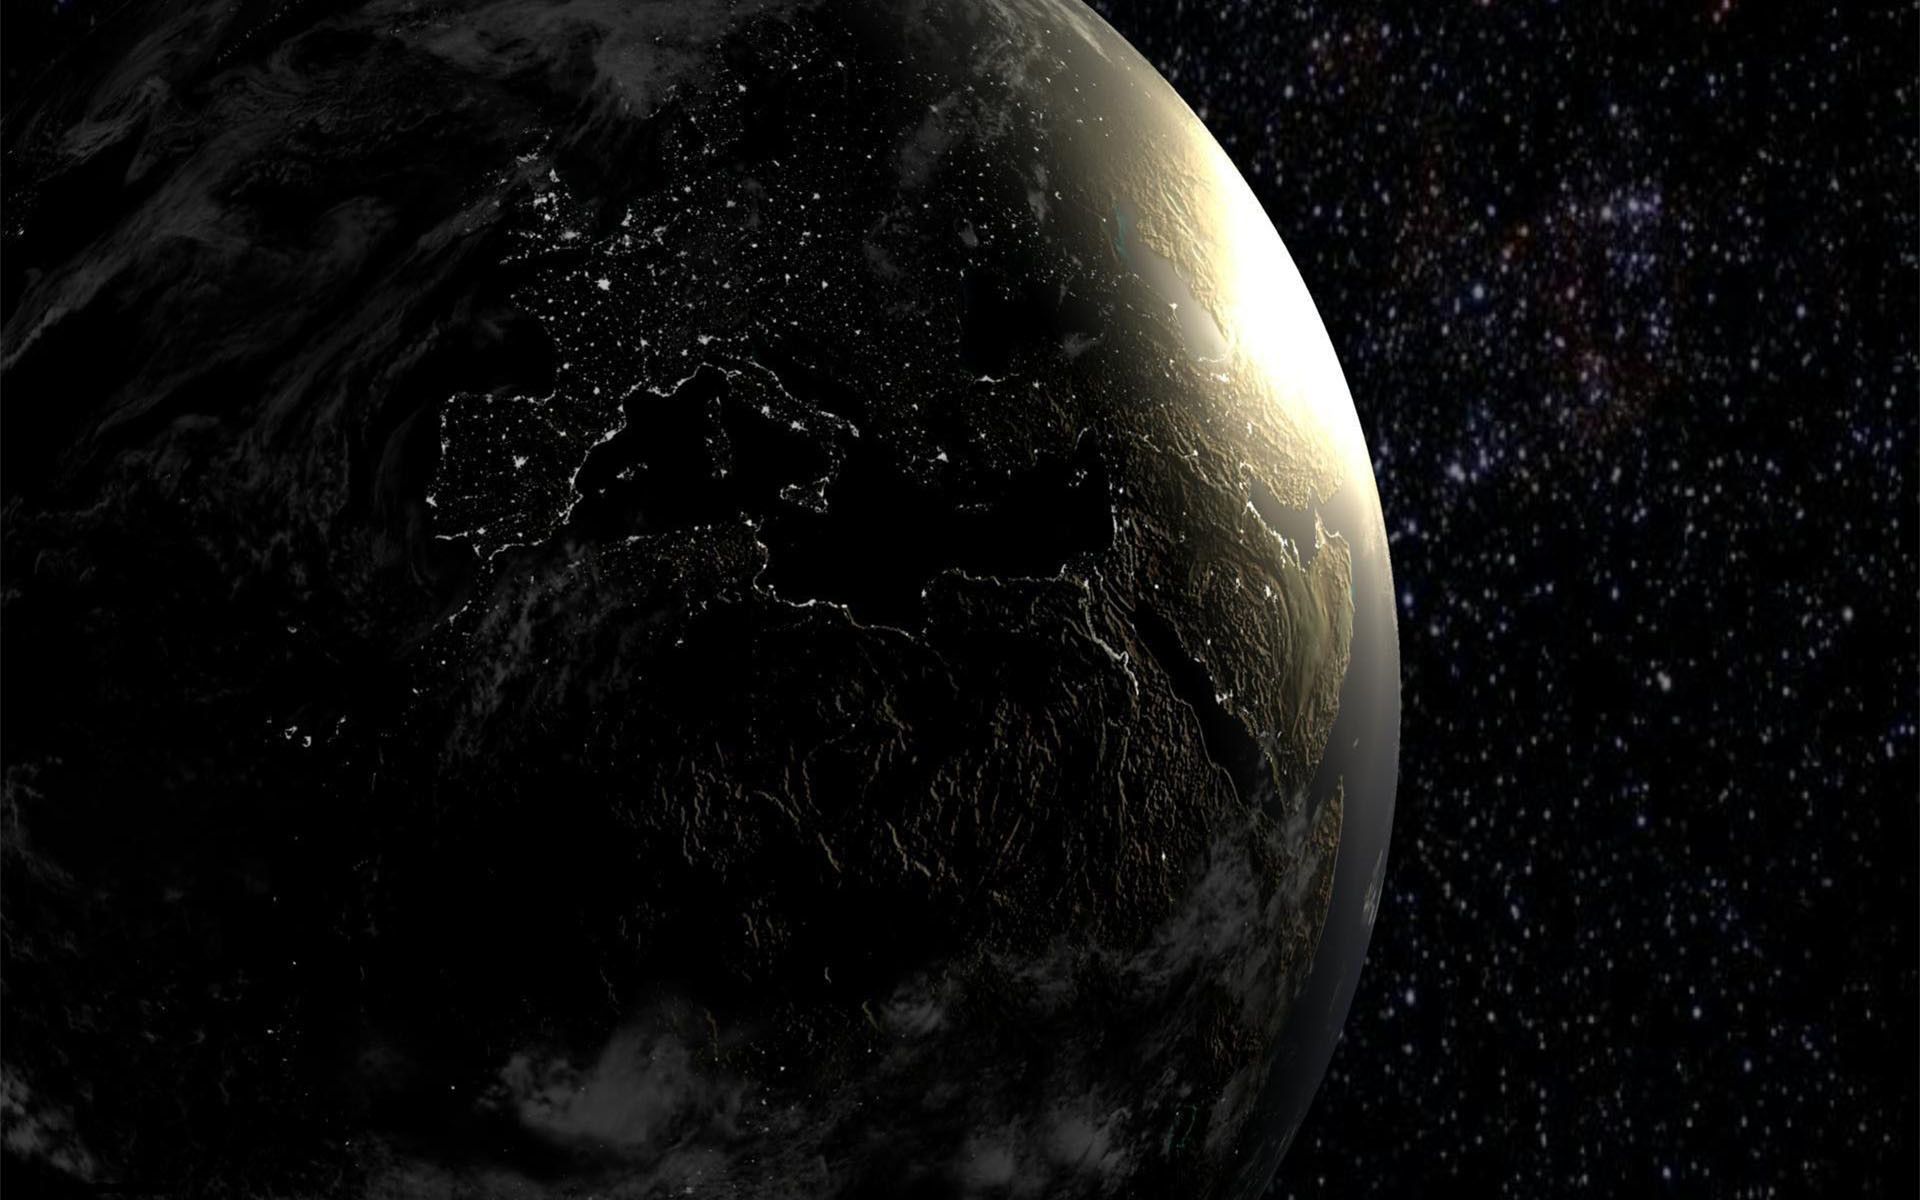 Planet Earth In Dark Universe Wallpapers